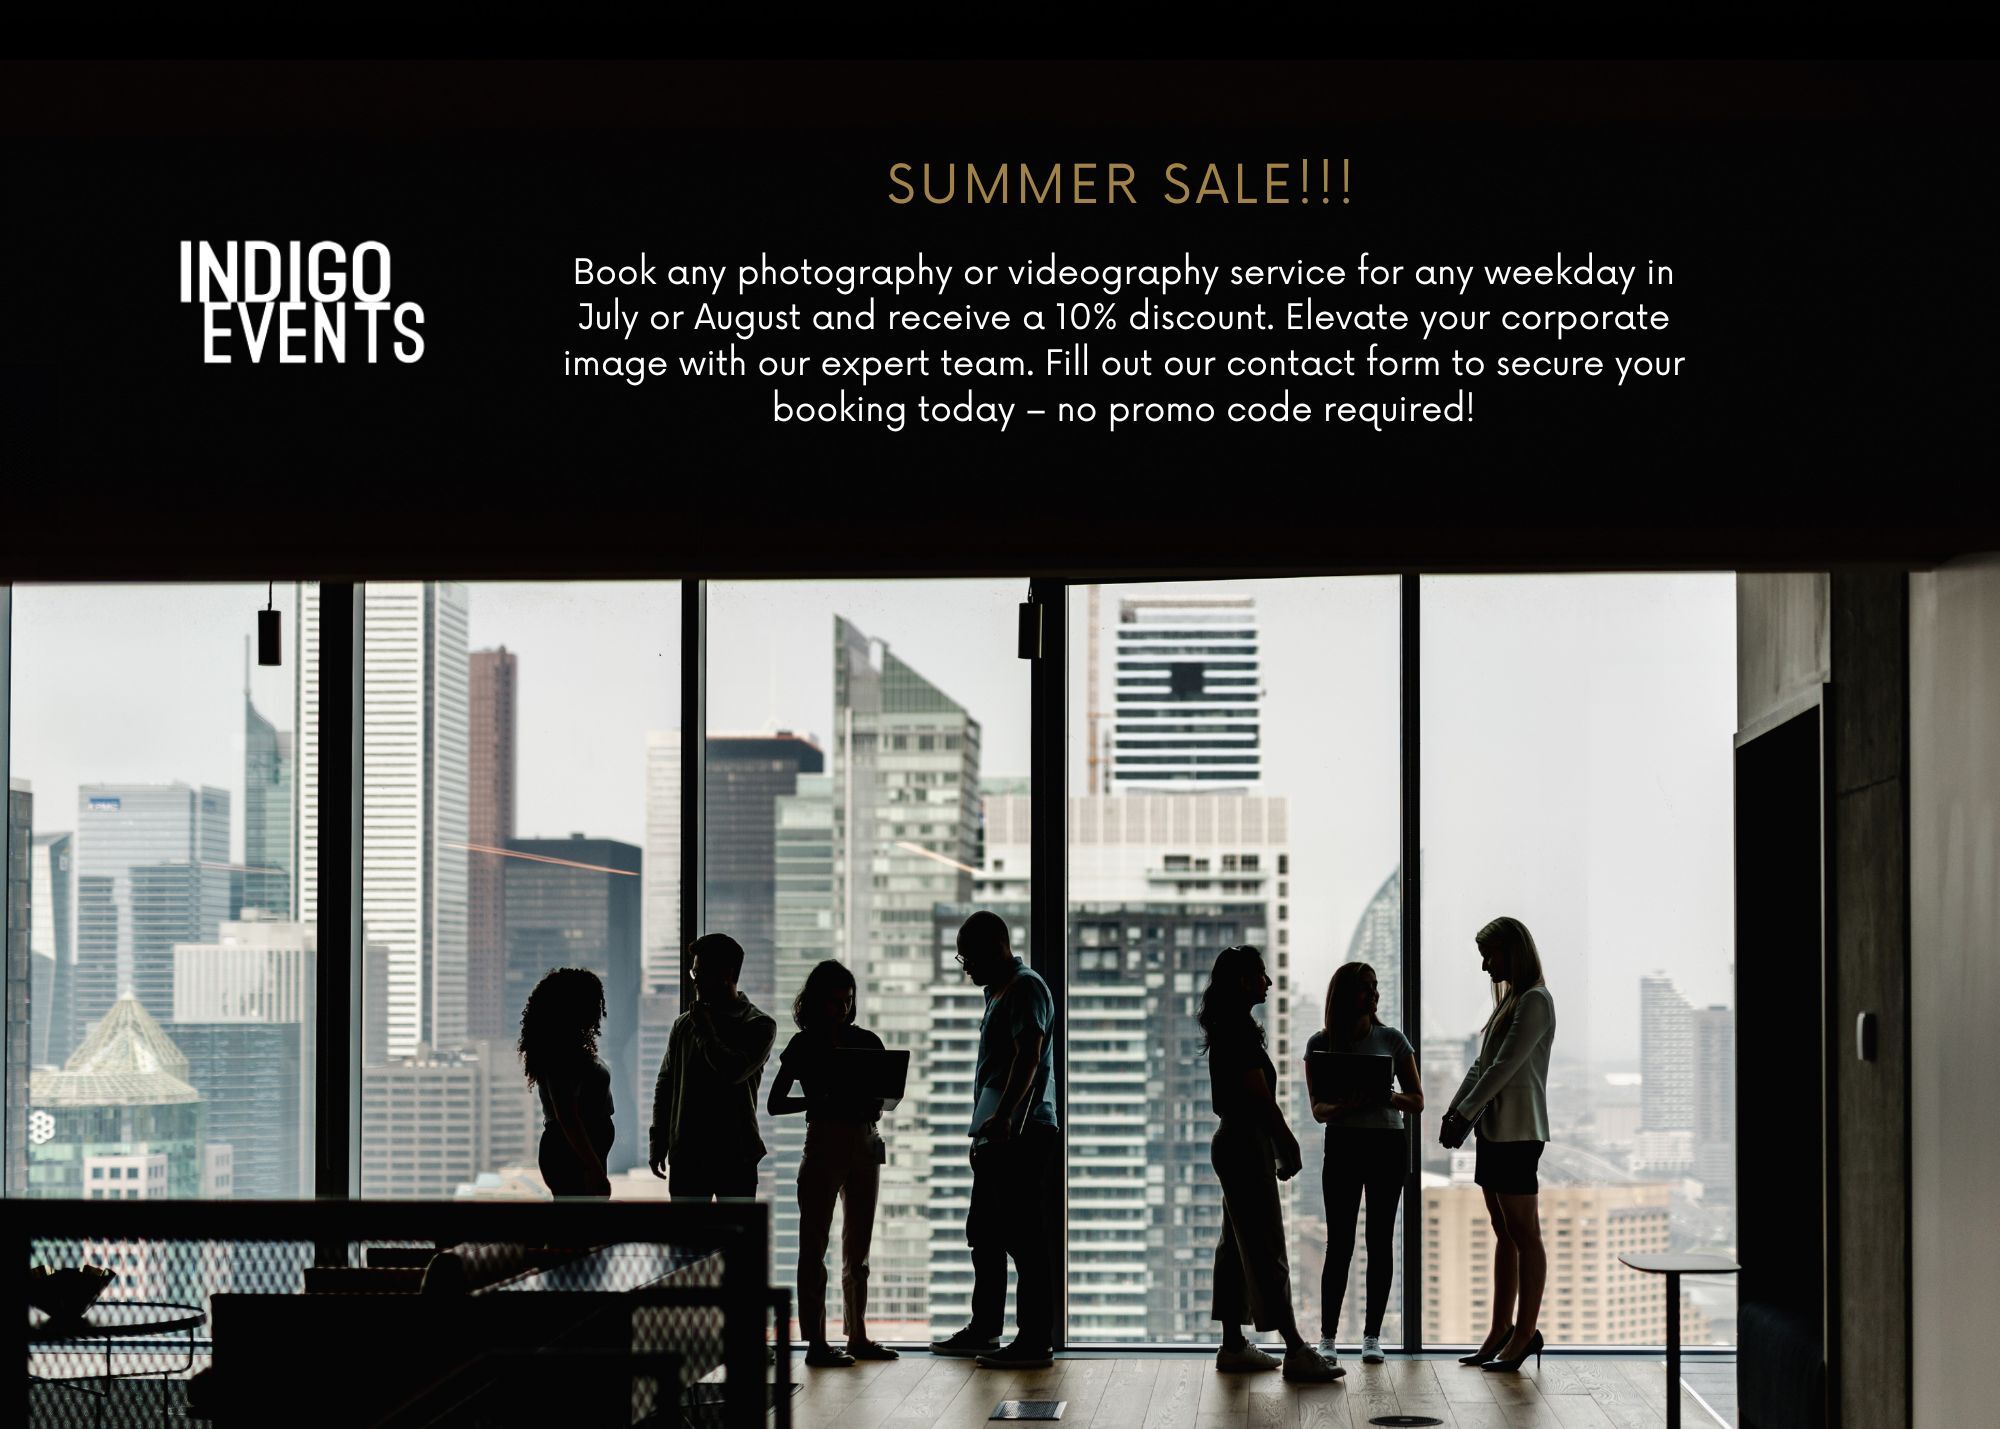 Silhouetted group of people in a modern office space with floor-to-ceiling windows overlooking a city skyline. Text details a summer sale from Indigo Events offering a 10% discount on services, perfect for capturing your next milestone with professional corporate photography.